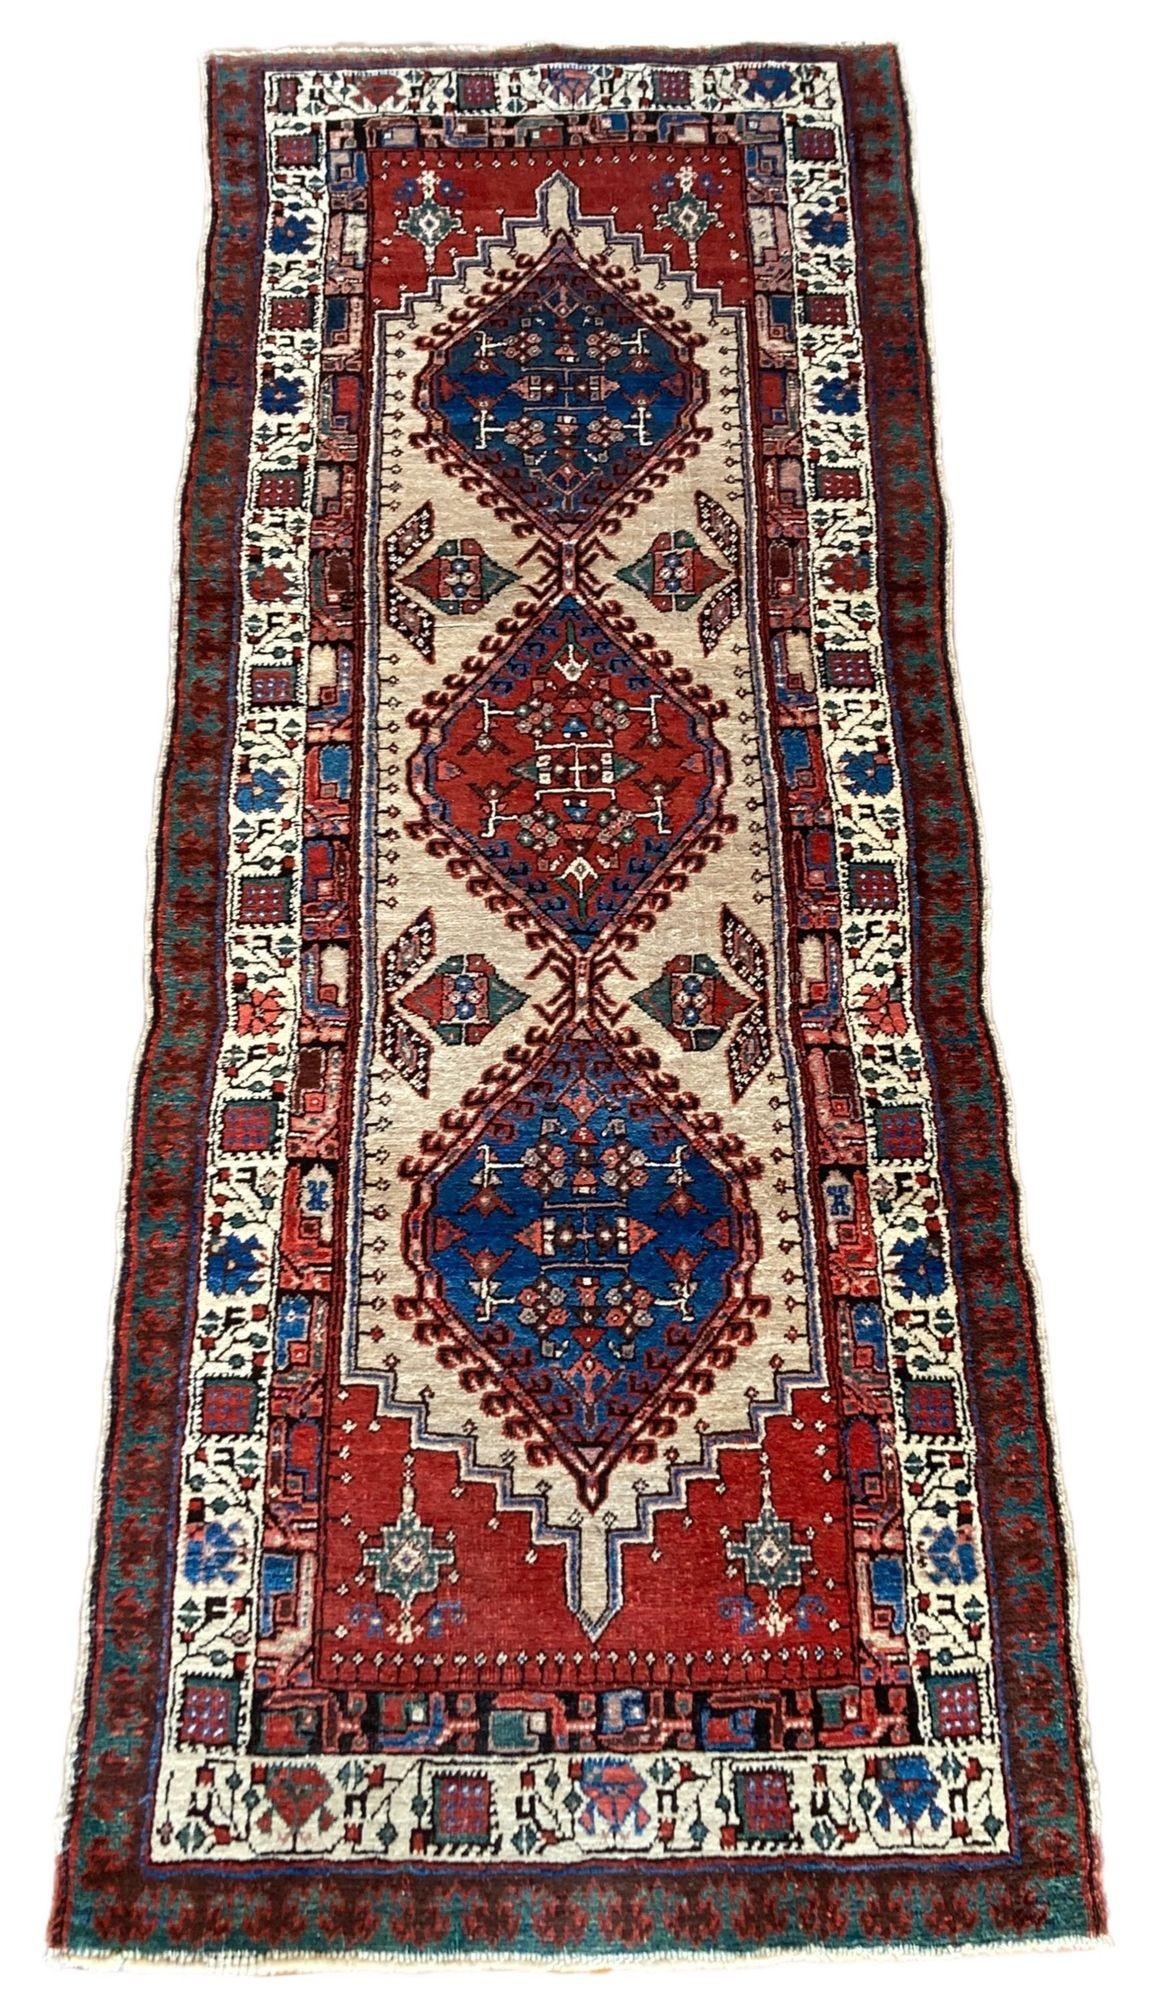 A fabulous little Sarab runner, handwoven circa 1910 with a traditional geometrical design on an ivory field and similar border. Finely woven with lovely quality wool and a decorative little runner.
Size: 2.22m x 0.89m (7ft 4in x 2ft 11in)
This rug